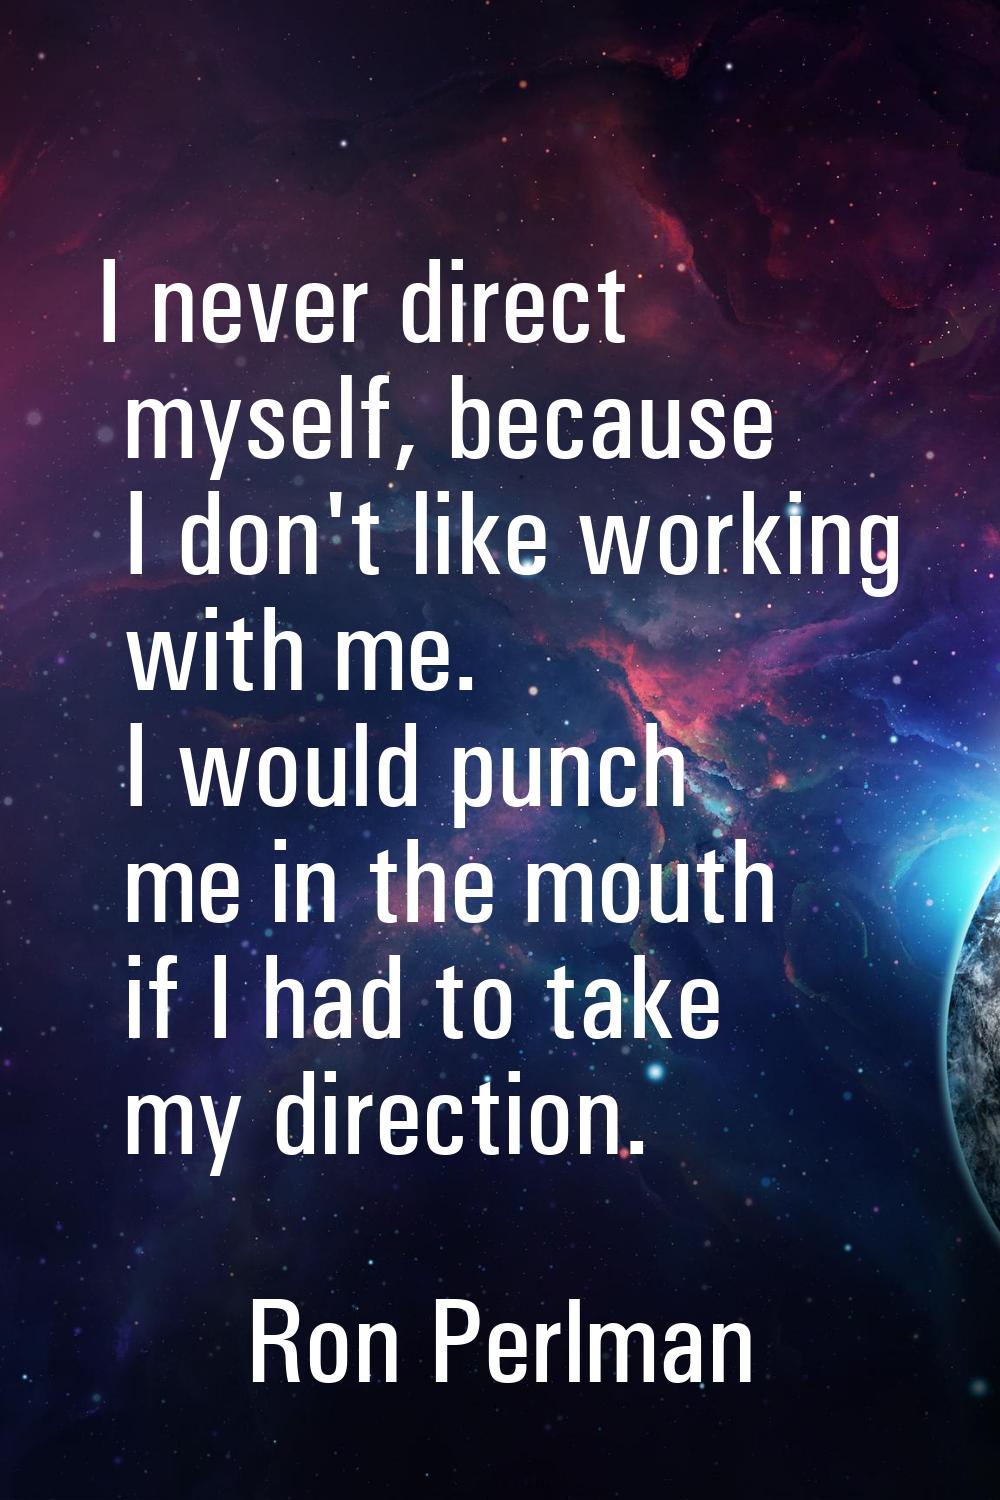 I never direct myself, because I don't like working with me. I would punch me in the mouth if I had